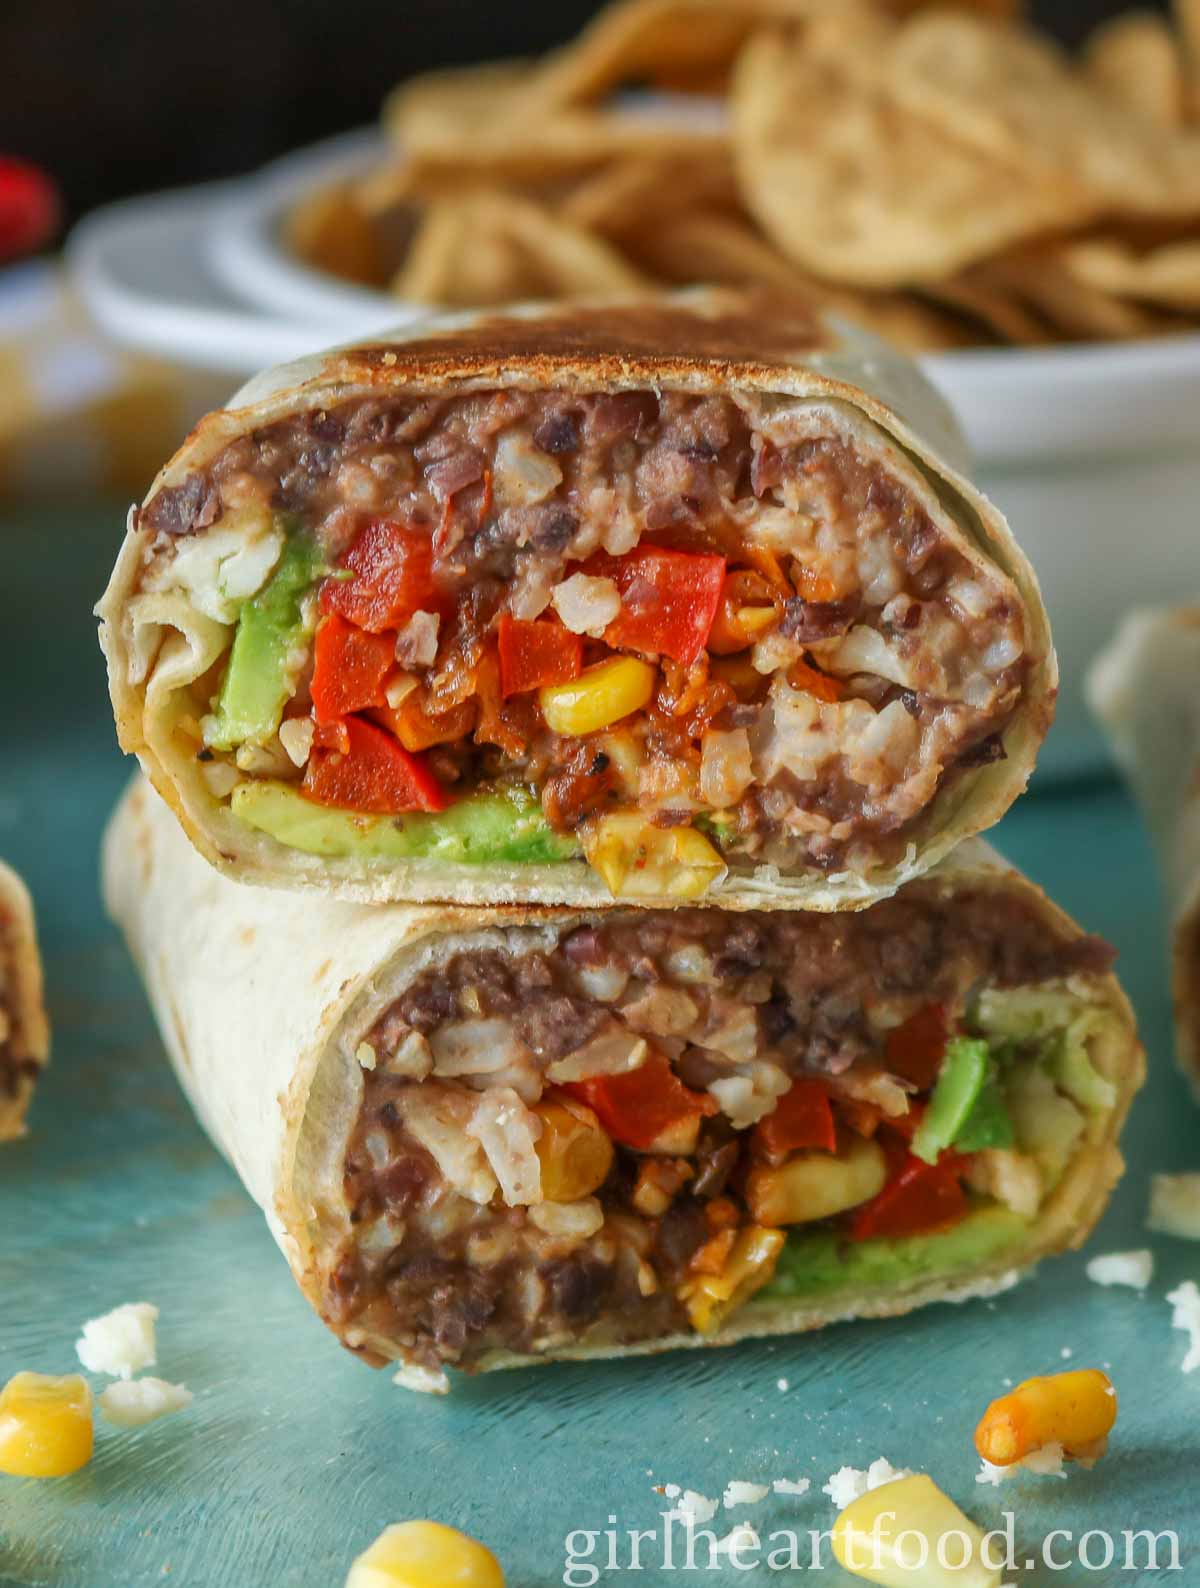 Close-up of a stack of two halves of a refried bean burrito.